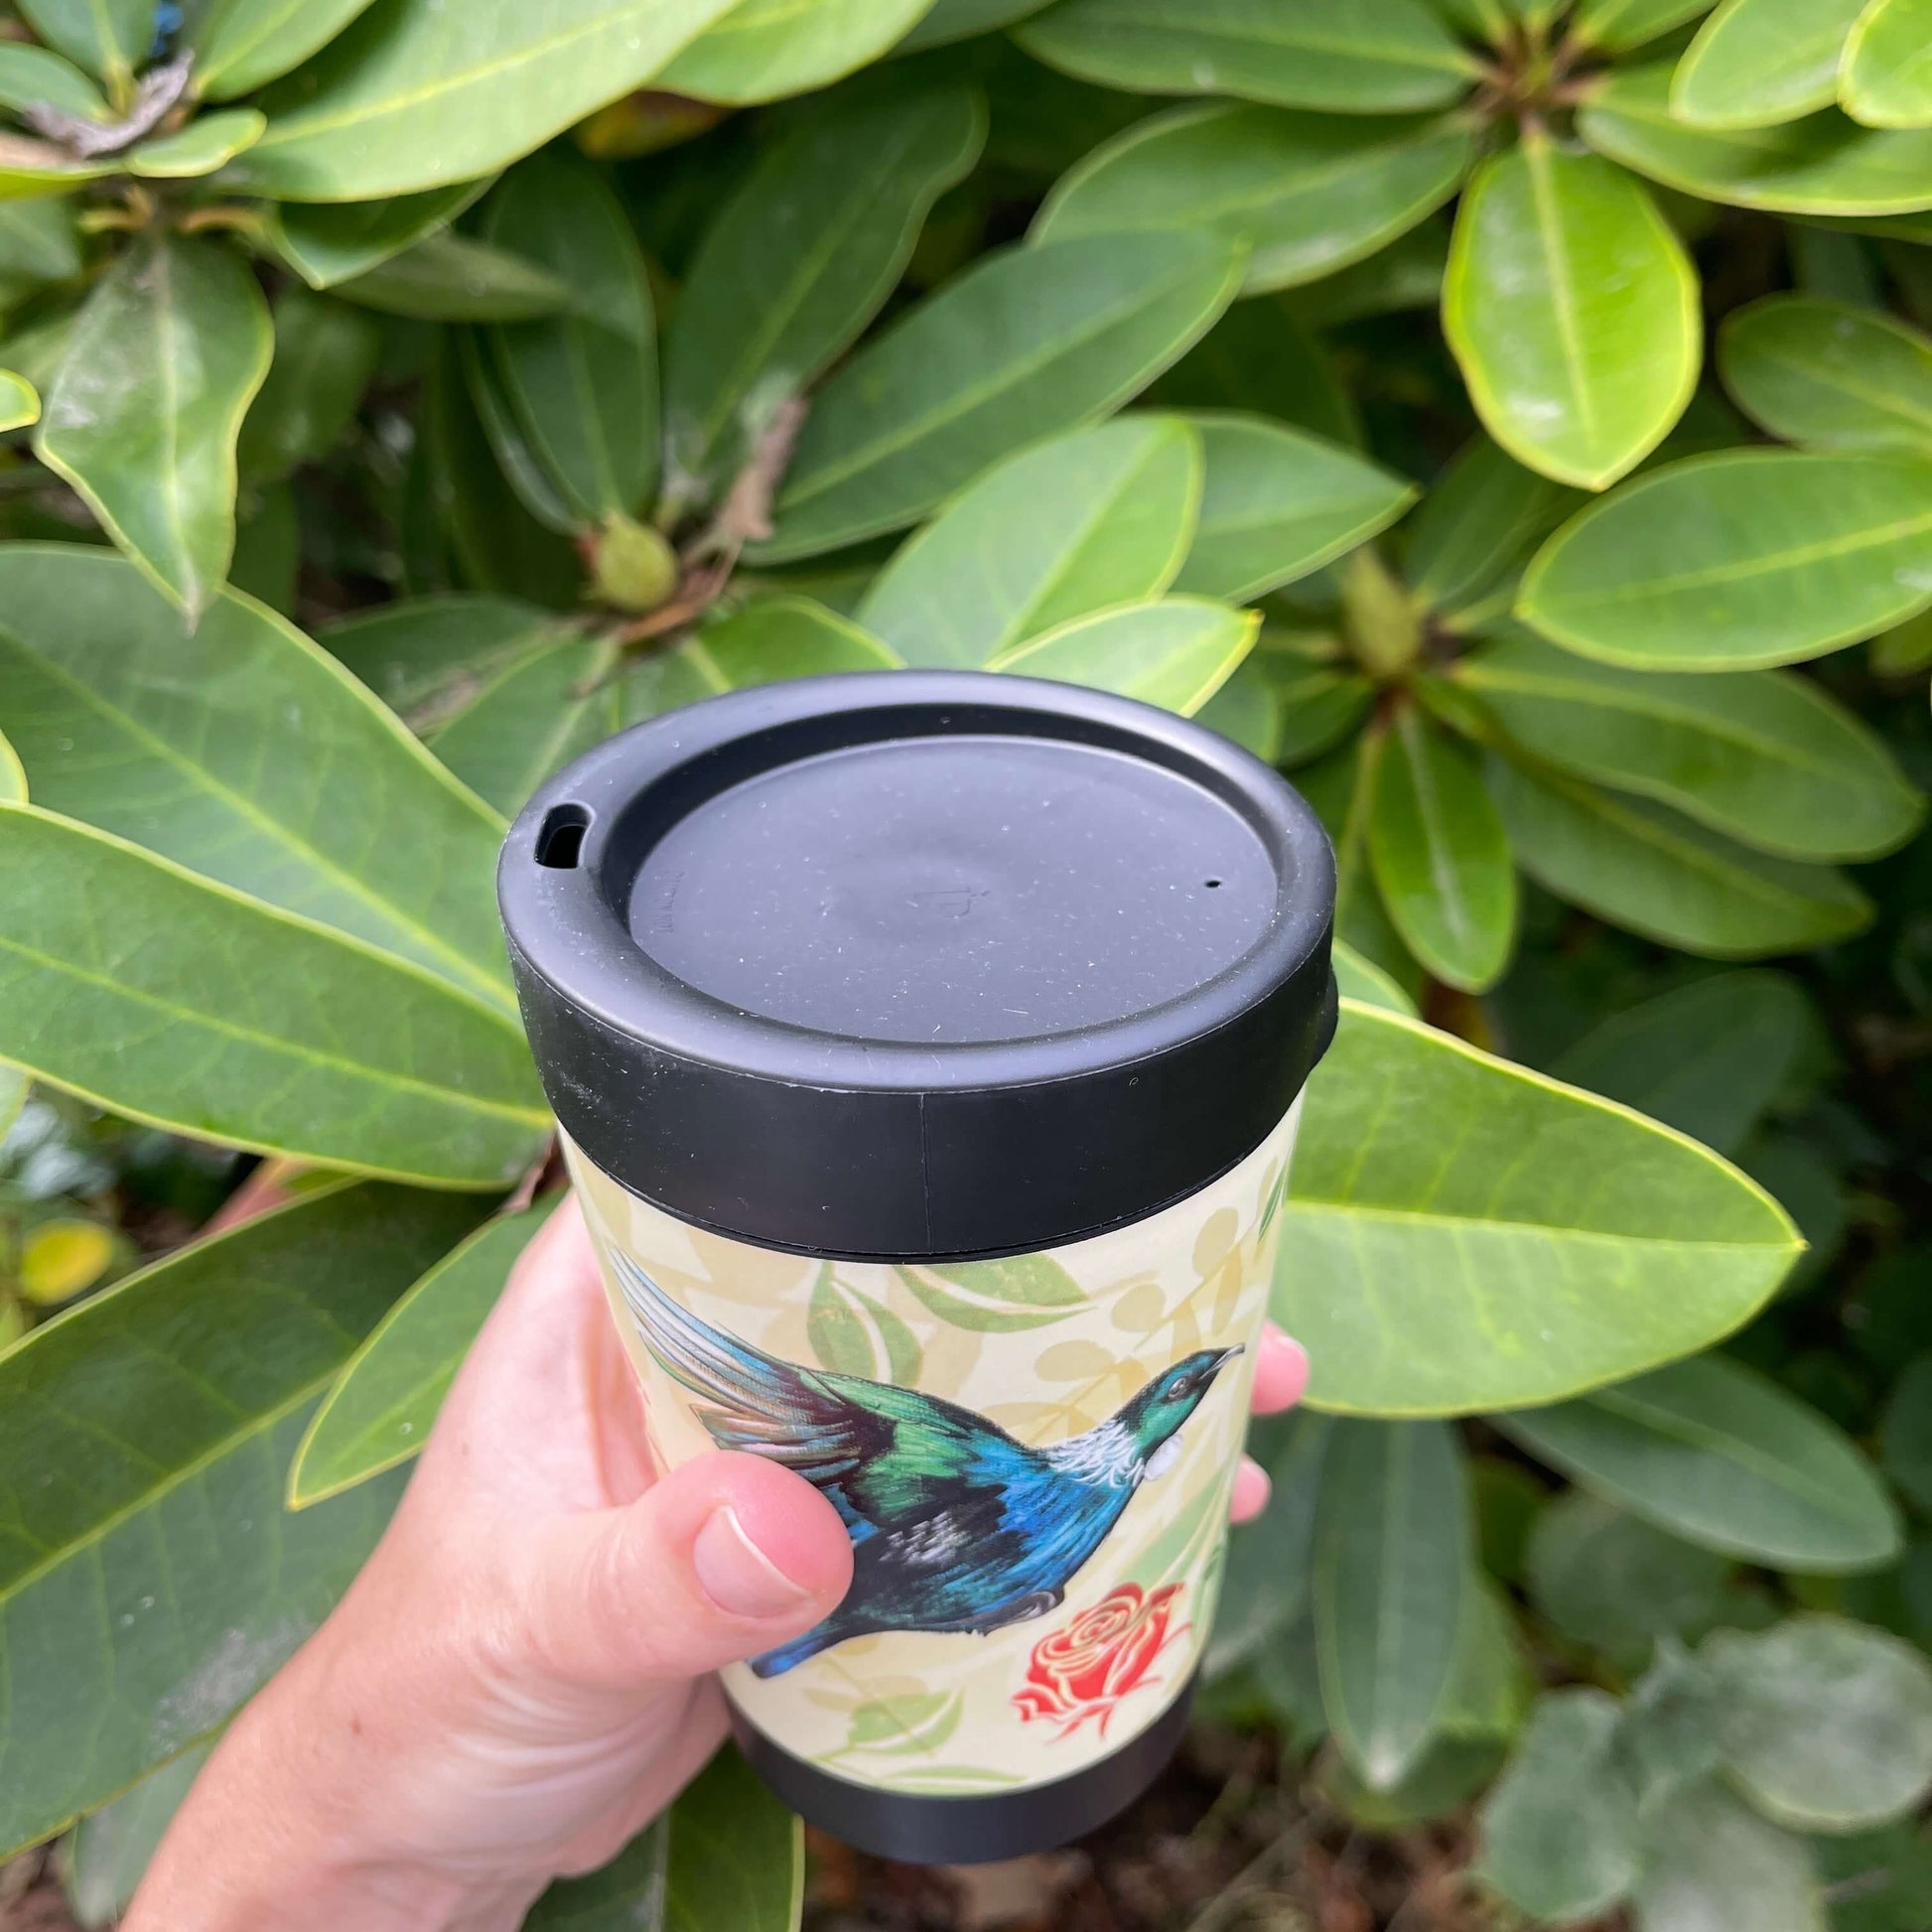 Black reusable coffee cup with beige and green leaf patterned wrap featuring the New Zealand Tui bird and red roses. Showing the lid with a sipper hole.